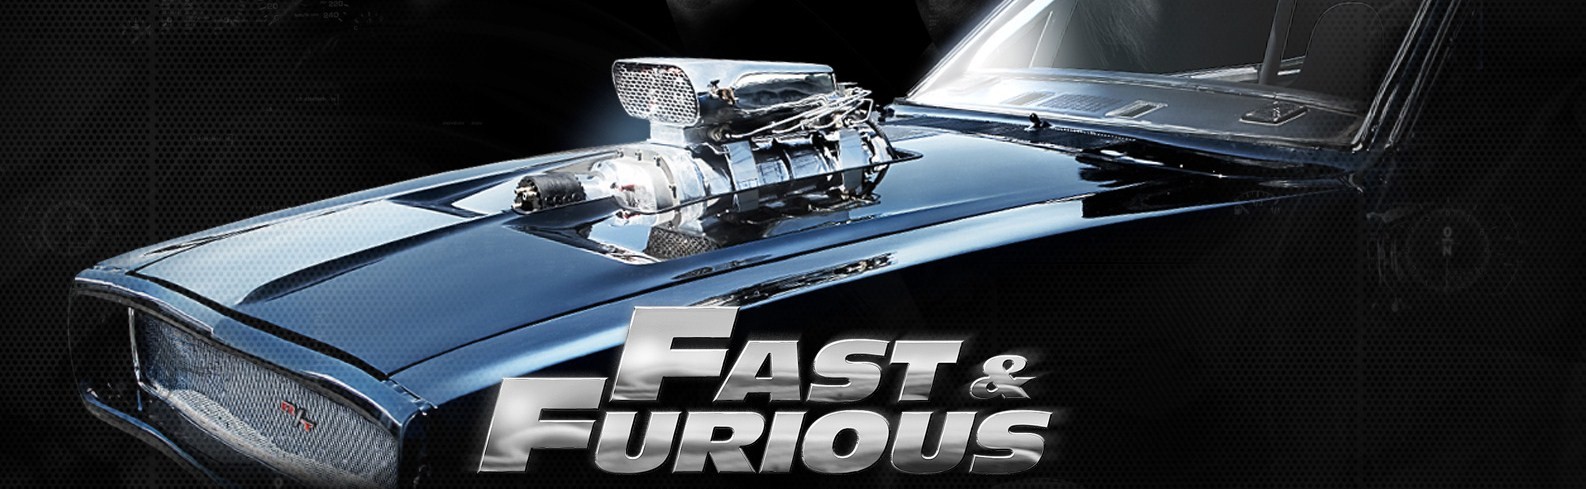 fast and furious wallpapers. vin diesel fast and furious